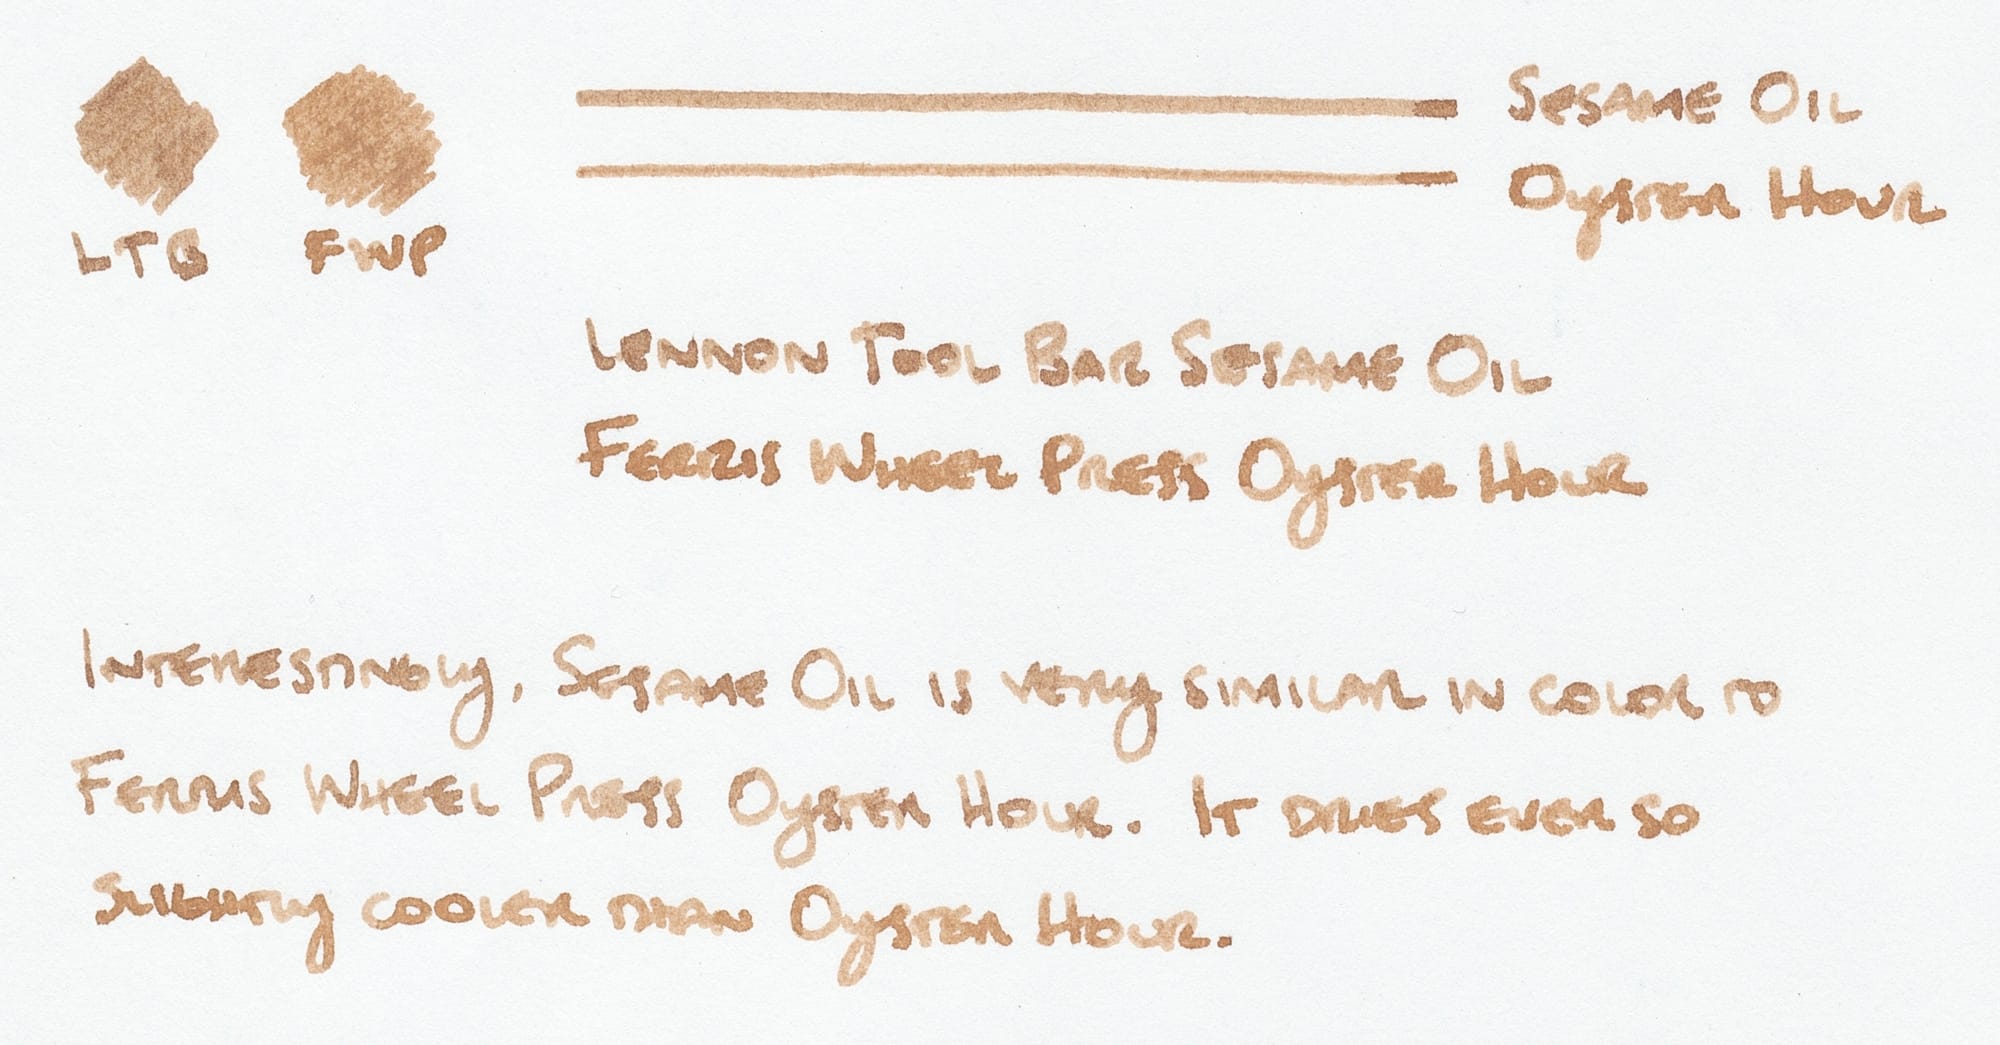 Comparison of Sesame Oil and Oyster Hour inks with small swatch scribbles from pens side by side, a line of each ink drawn close to each other, and a couple sentences where, "Interestingly, Sesame Oil is very similar in color to Ferris Wheel Press Oyster Hour," is written using Sesame Oil, and, "It dries ever so slightly cooler than Oyster Hour," written using Oyster Hour. 